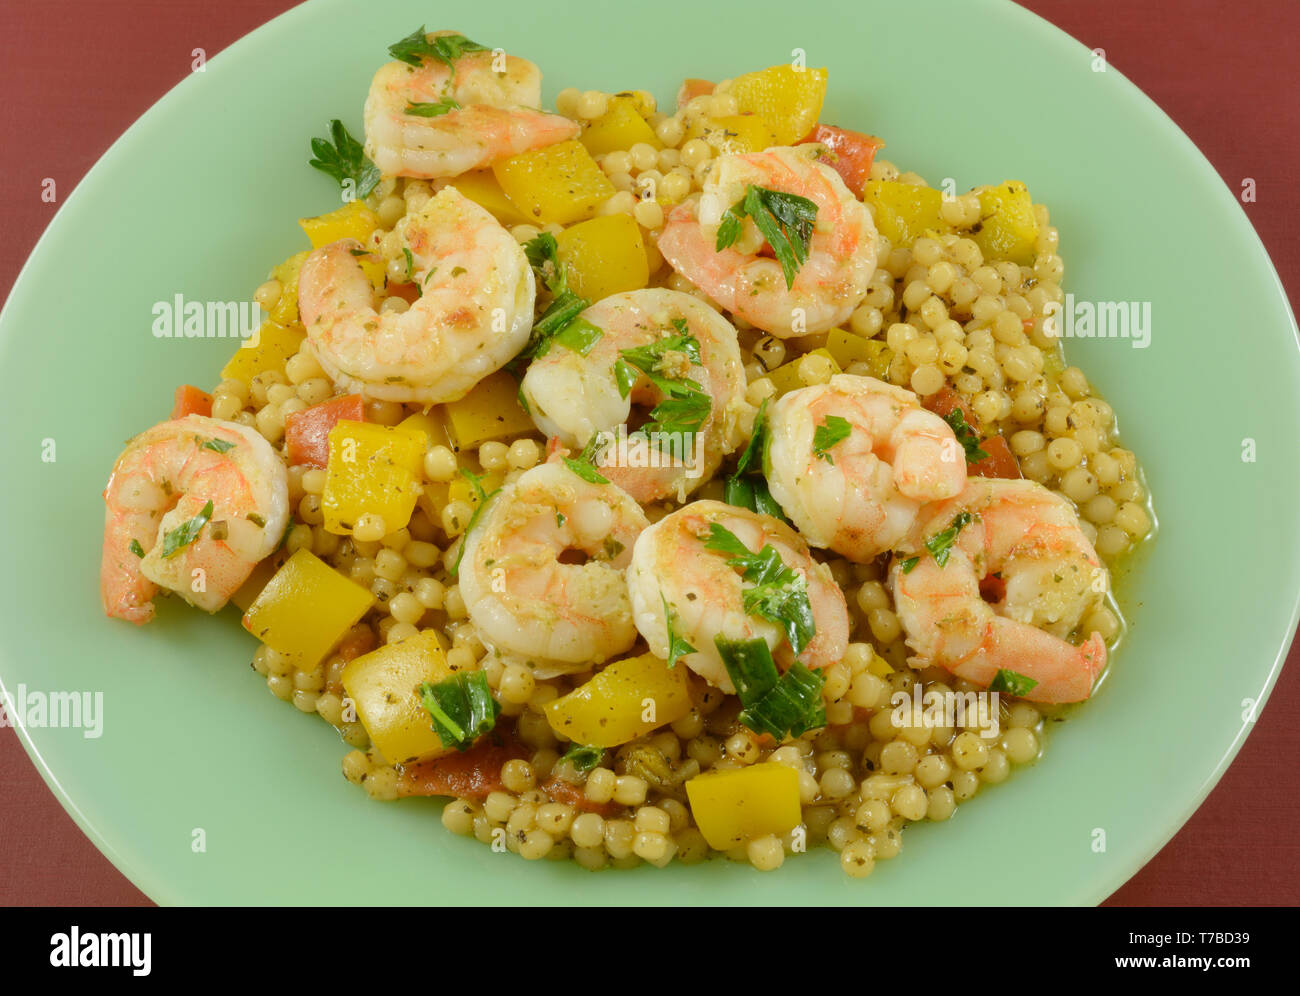 Shrimp, yellow bell peppers and pearl couscous dinner on green plate on red table Stock Photo